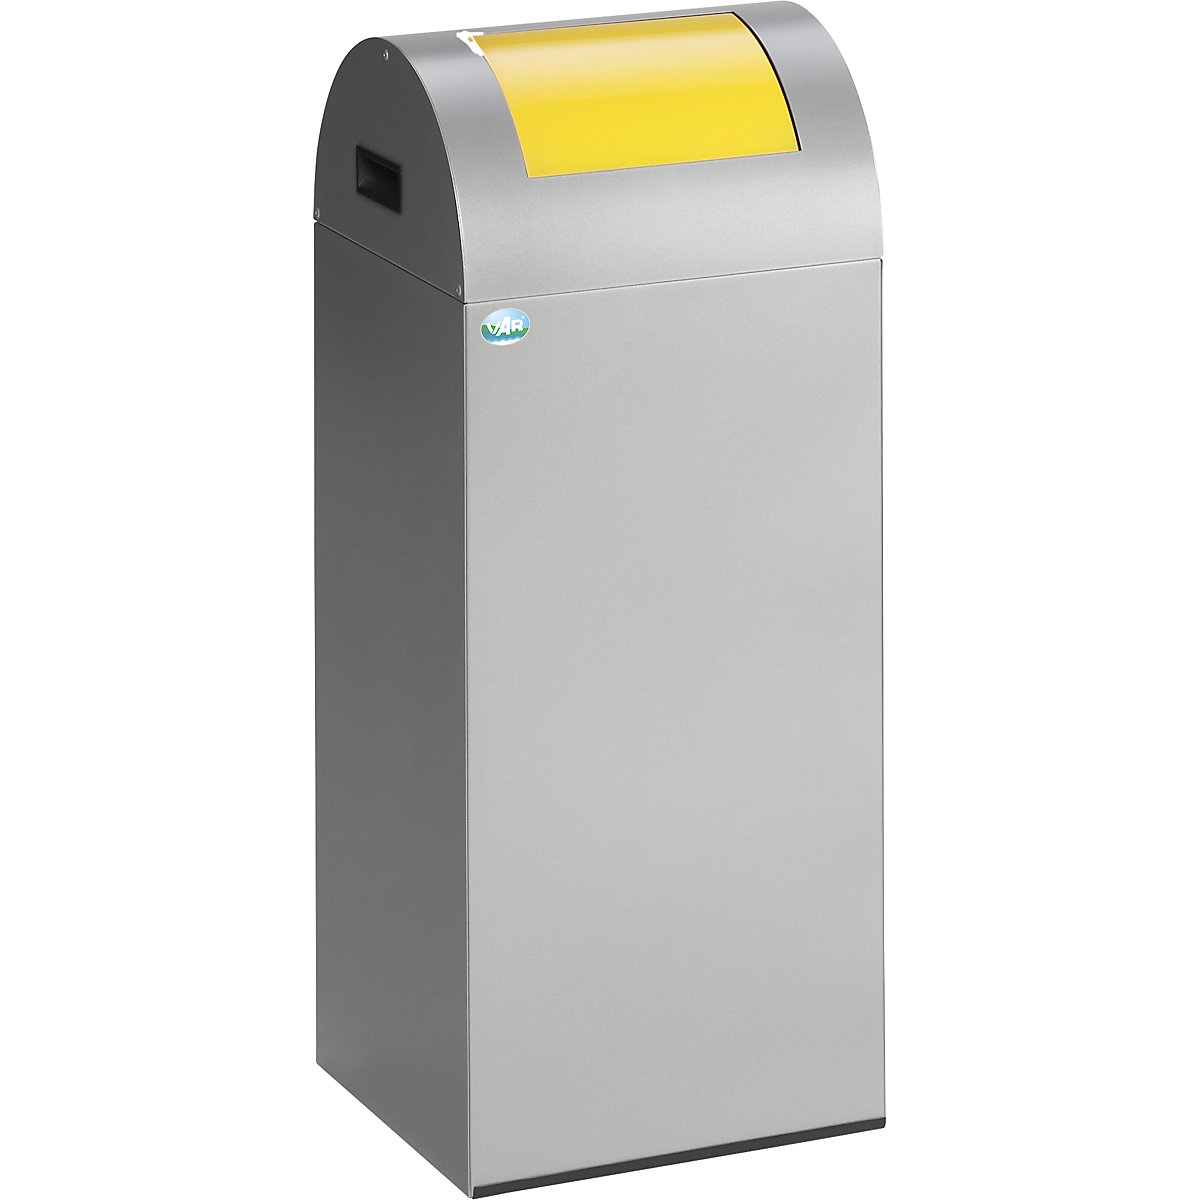 Self extinguishing recyclable waste collector – VAR, capacity 60 l, WxHxD 320 x 800 x 320 mm, silver, yellow flap-4